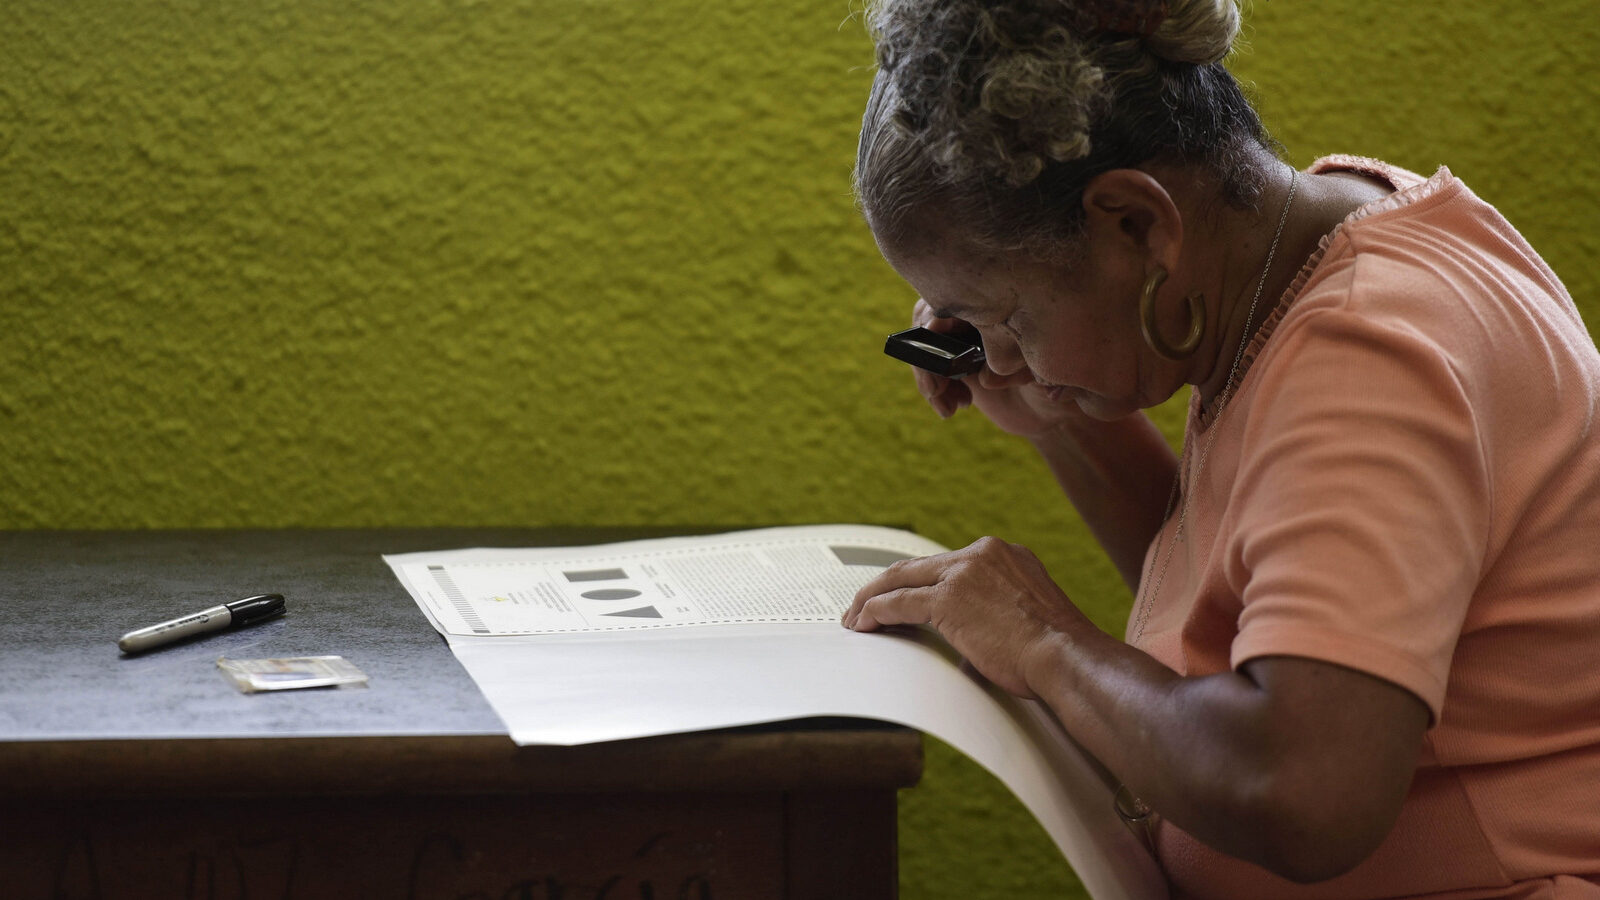 Puerto Rican resident Maria Quinones looks carefully at her ballot with a magnifying glass before voting during the fifth referendum on the island's status, in San Juan, Puerto Rico, June 11, 2017. (AP/Carlos Giusti)